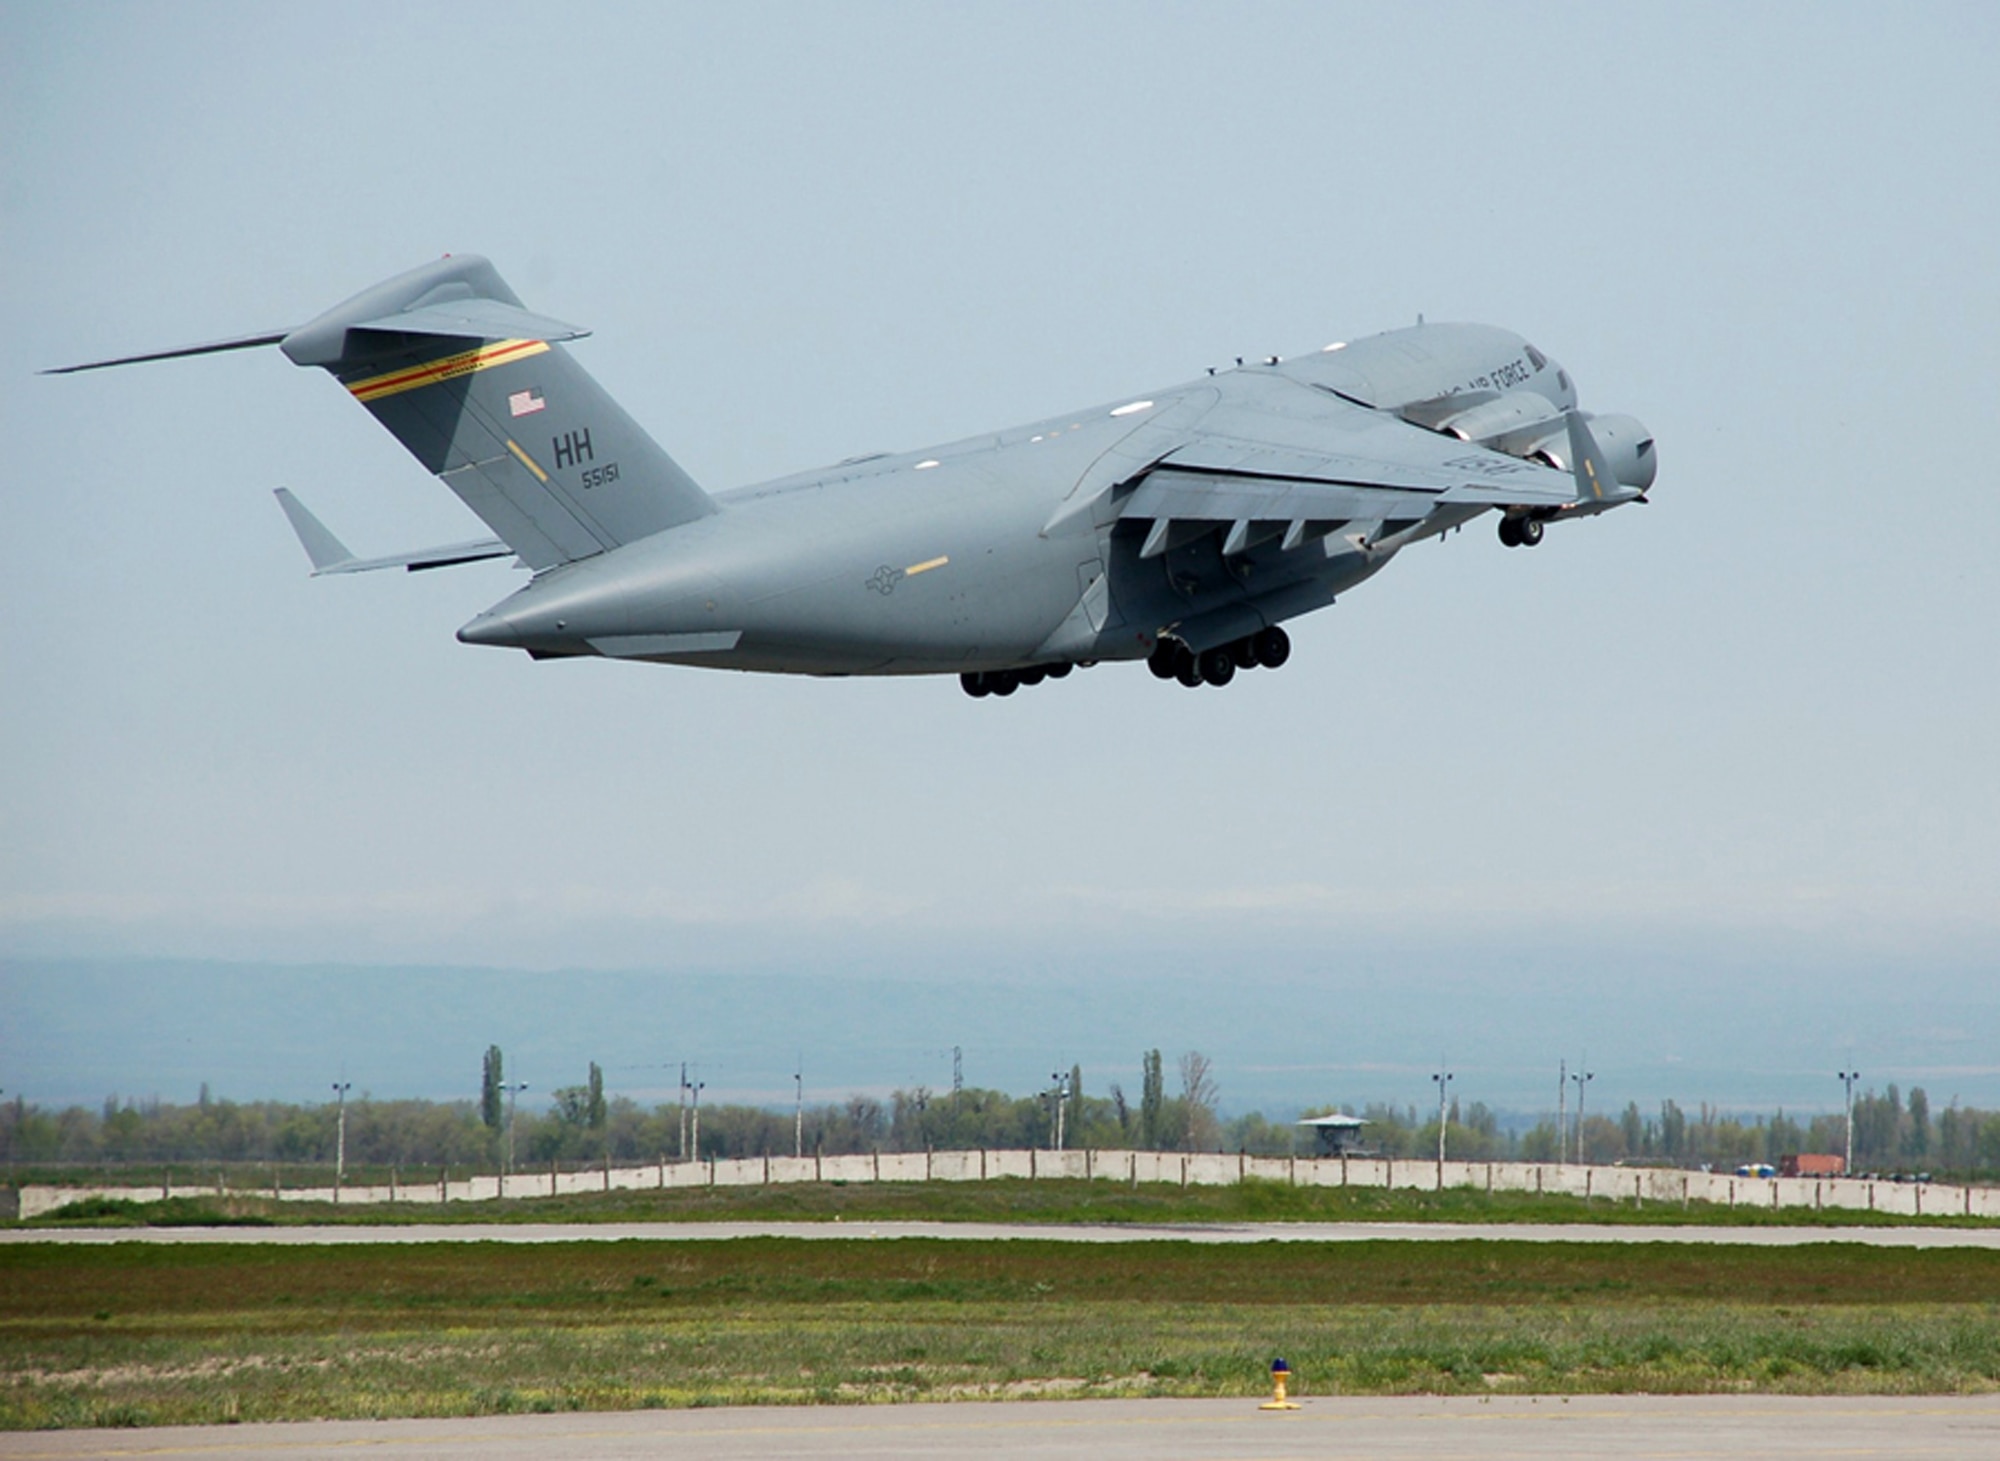 A C-17 Globemaster III from the 535th Airlift Squadron at Hickam Air Force Base, Hawaii, takes off from Manas Air Base, Kyrgyzstan, April 18 with a load of cargo destined for Afghanistan. For the past five weeks, three C-17 aircrews from Pacific Air Forces have been flying three flights nearly every day in order to deliver needed supplies for the buildup of various bases supporting Operation Enduring Freedom. (U.S. Air Force photo/Tech. Sgt. Phyllis Hanson)